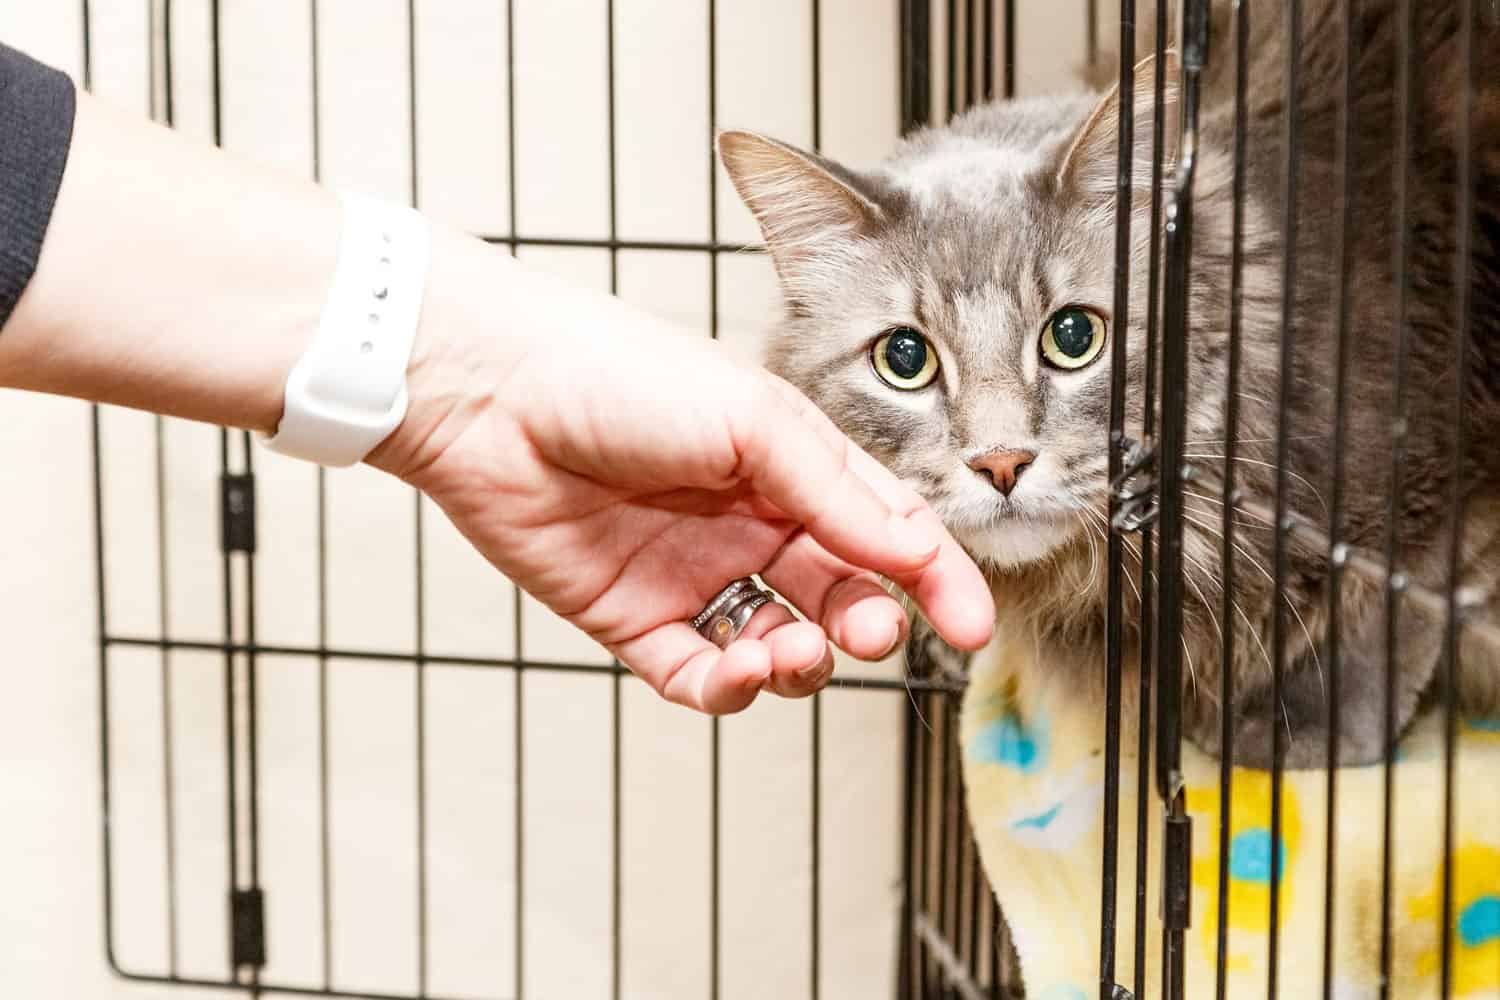 How Much Does It Cost To Adopt a Cat